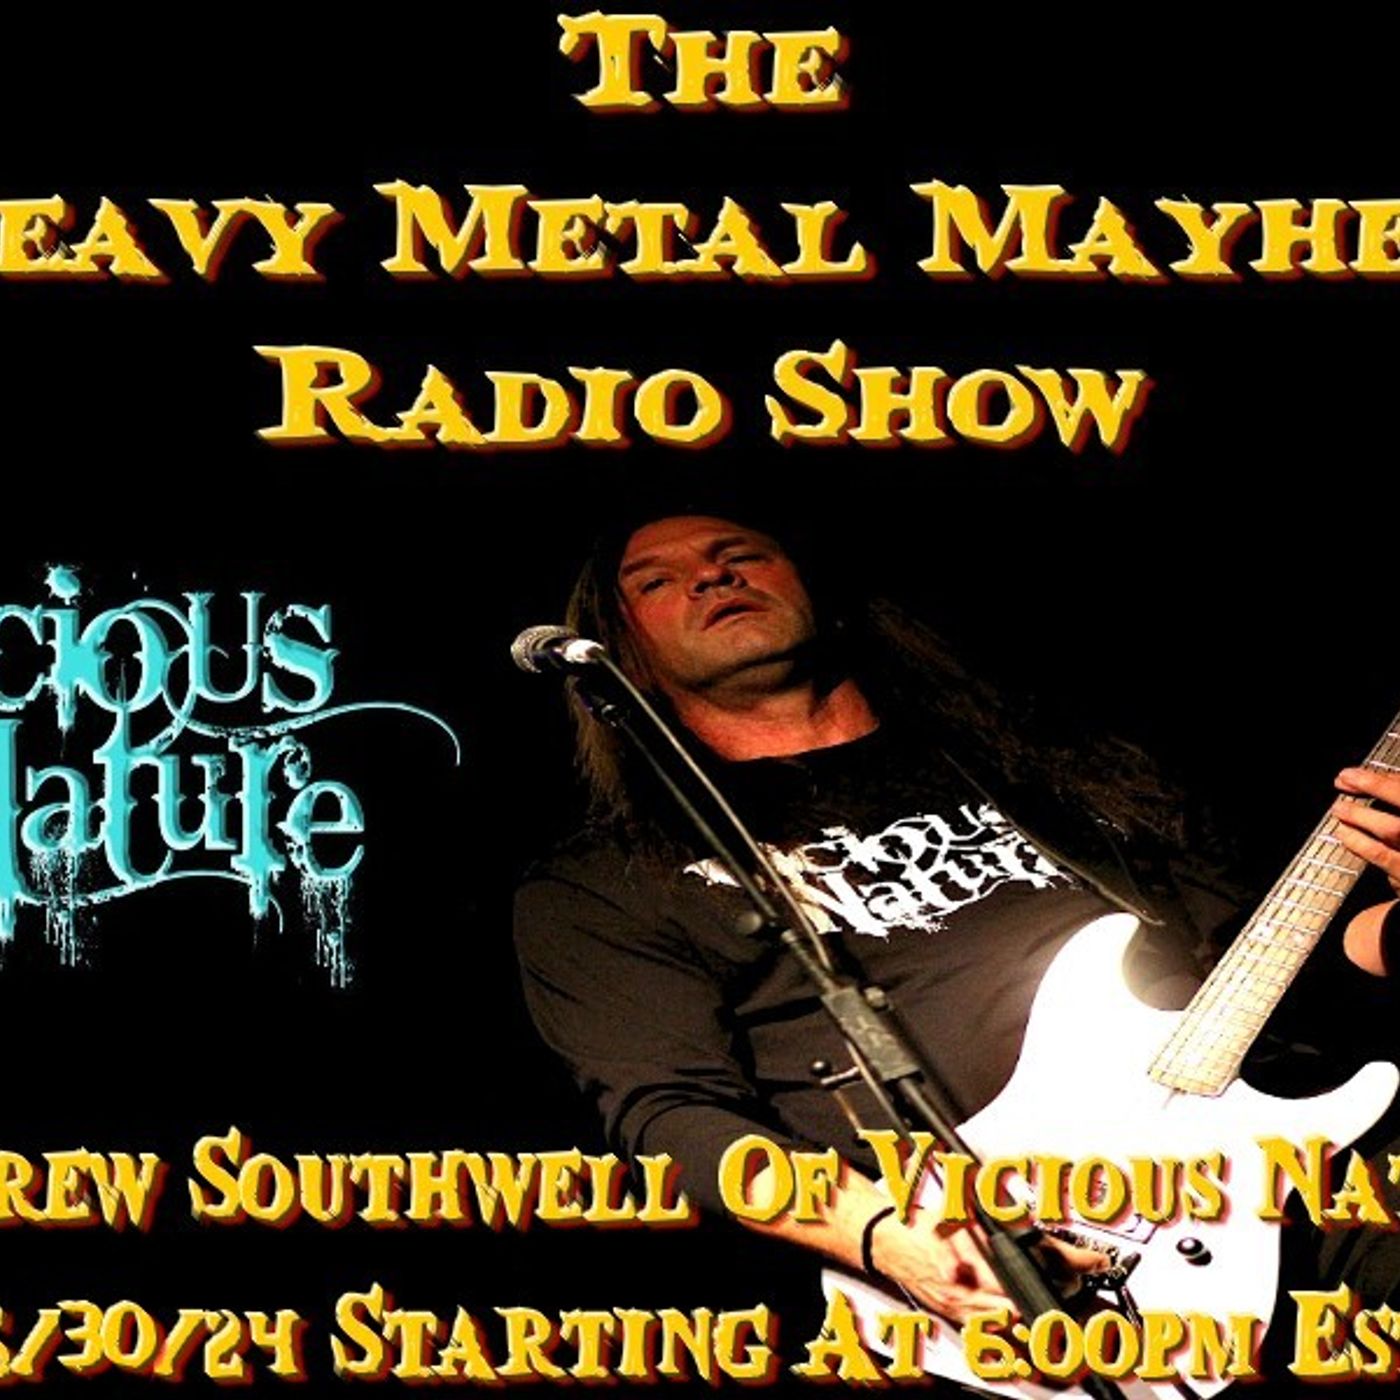 Guest Andrew Southwell Of Vicious Nature & Scarlett Monastyrski Of Sabire 6/30/24